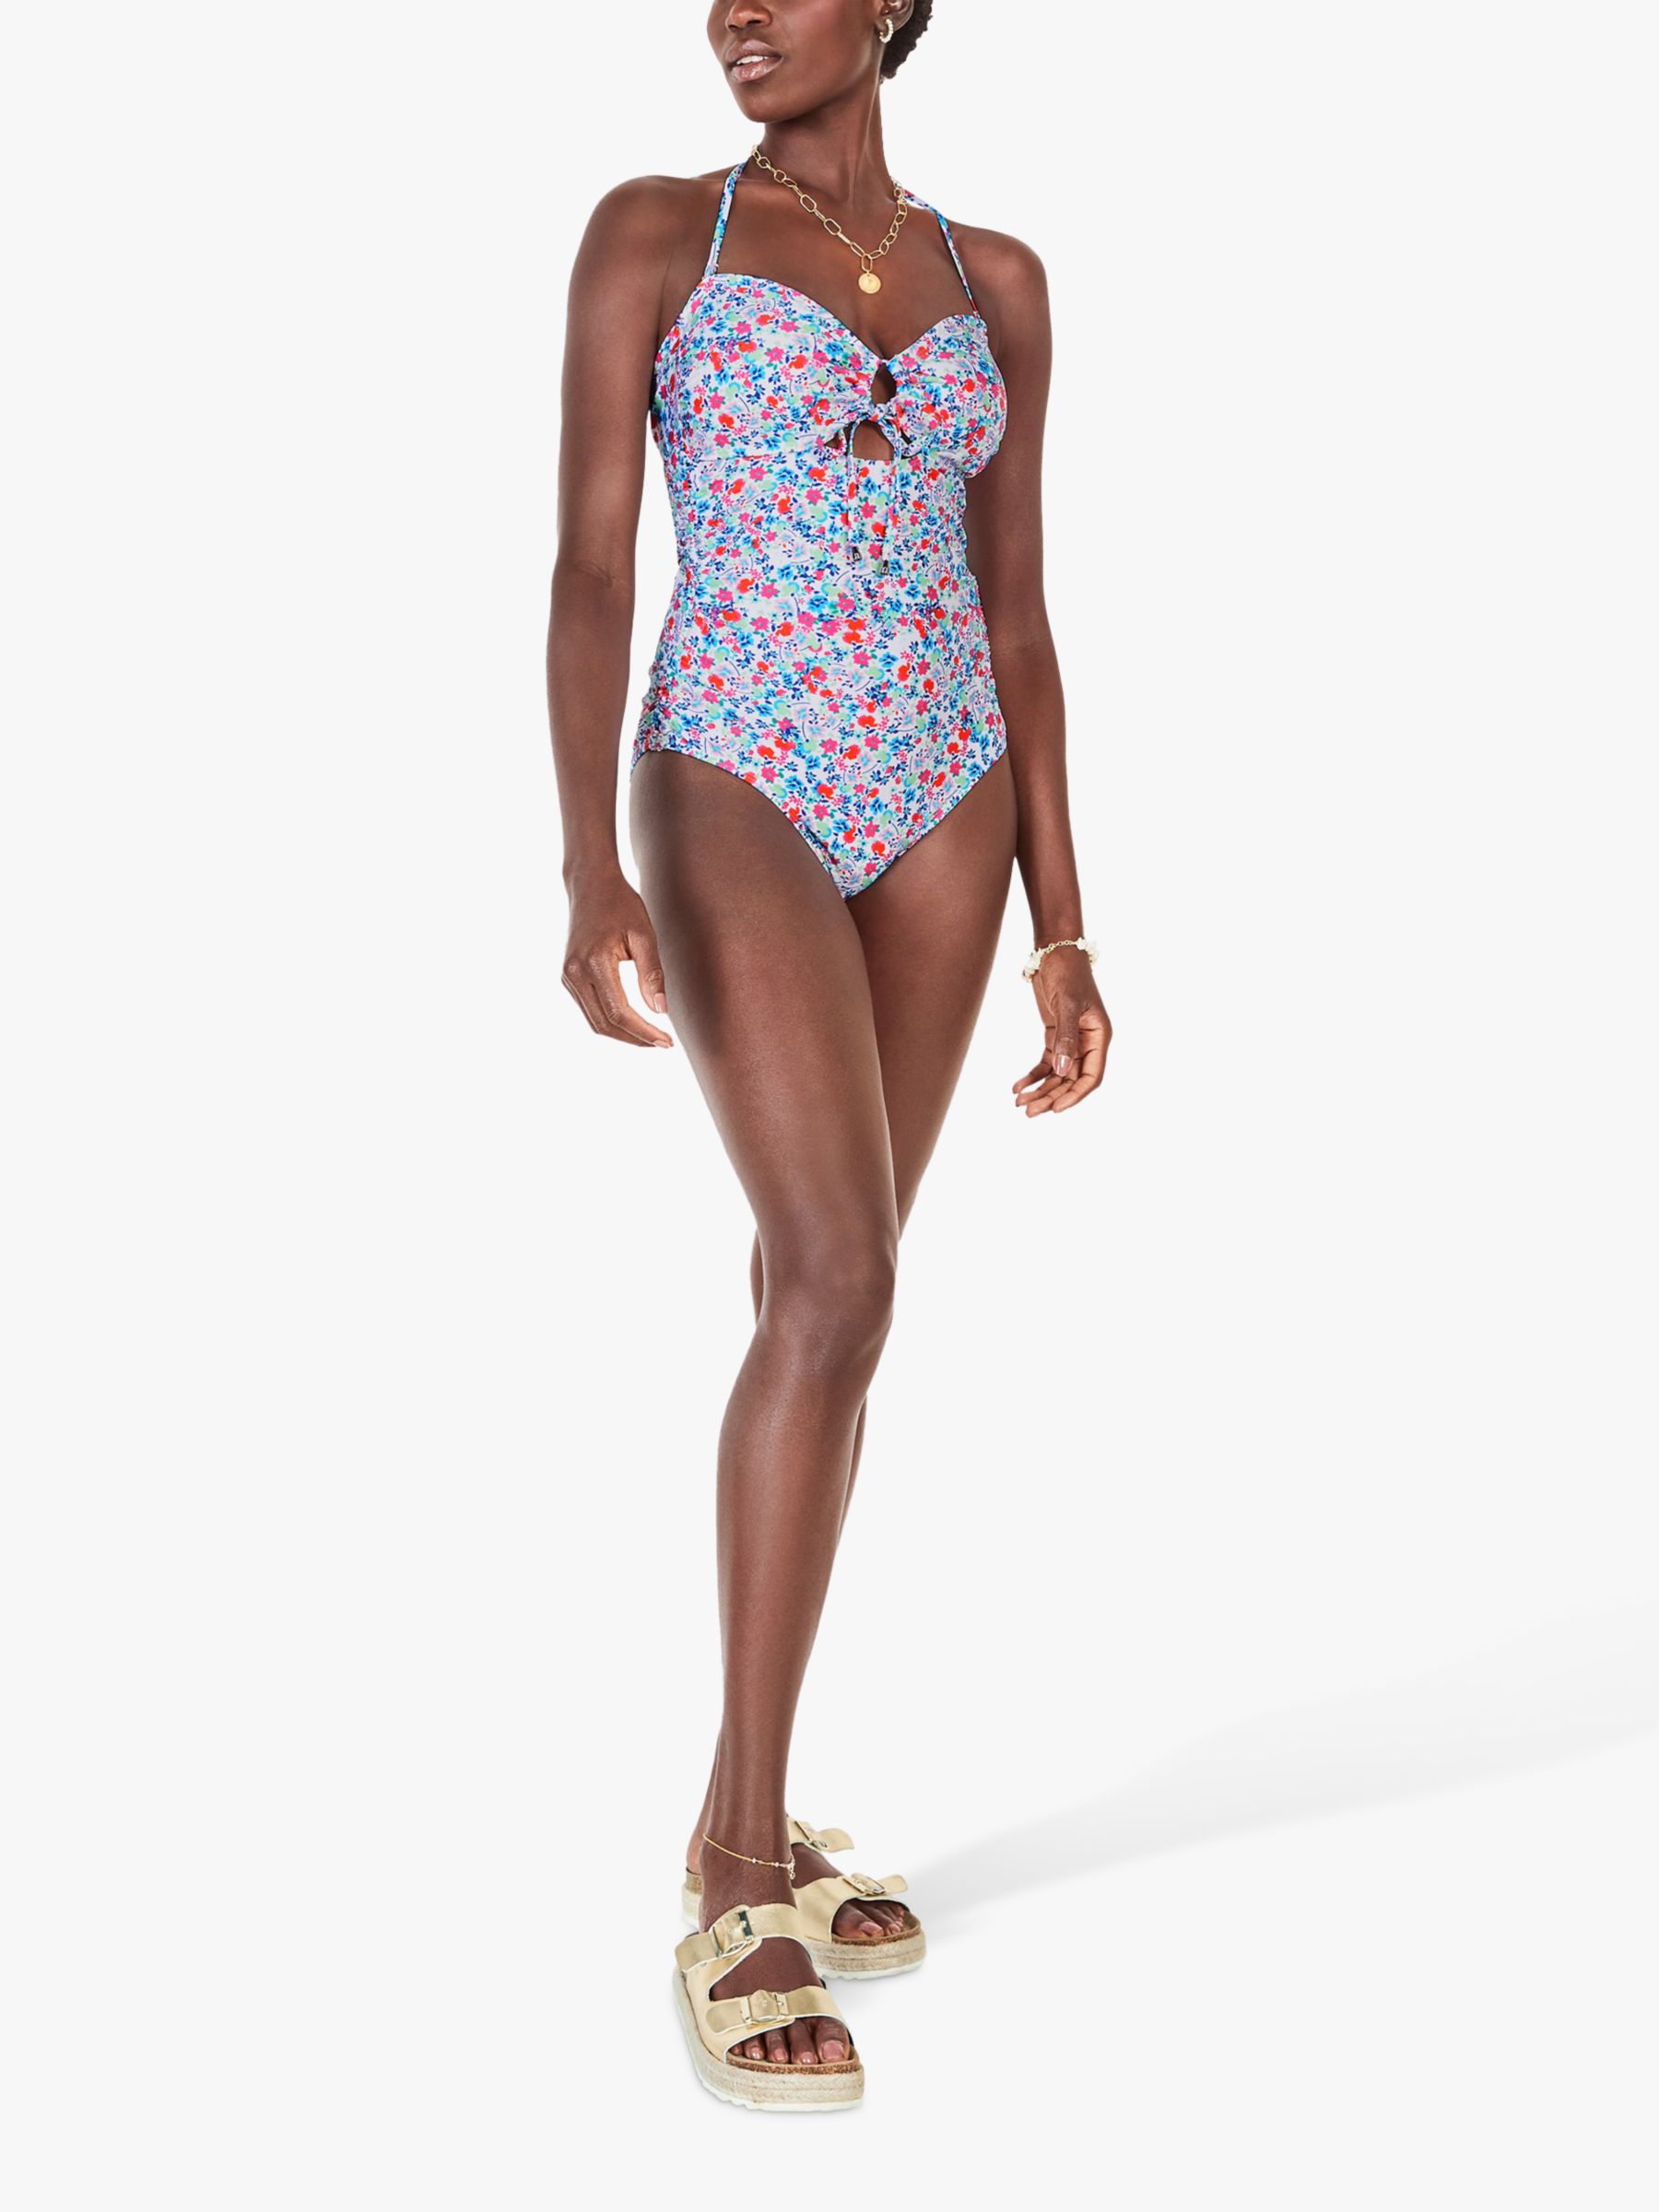 HUSH Graphic Floral Print Ruched Swimsuit, Multi